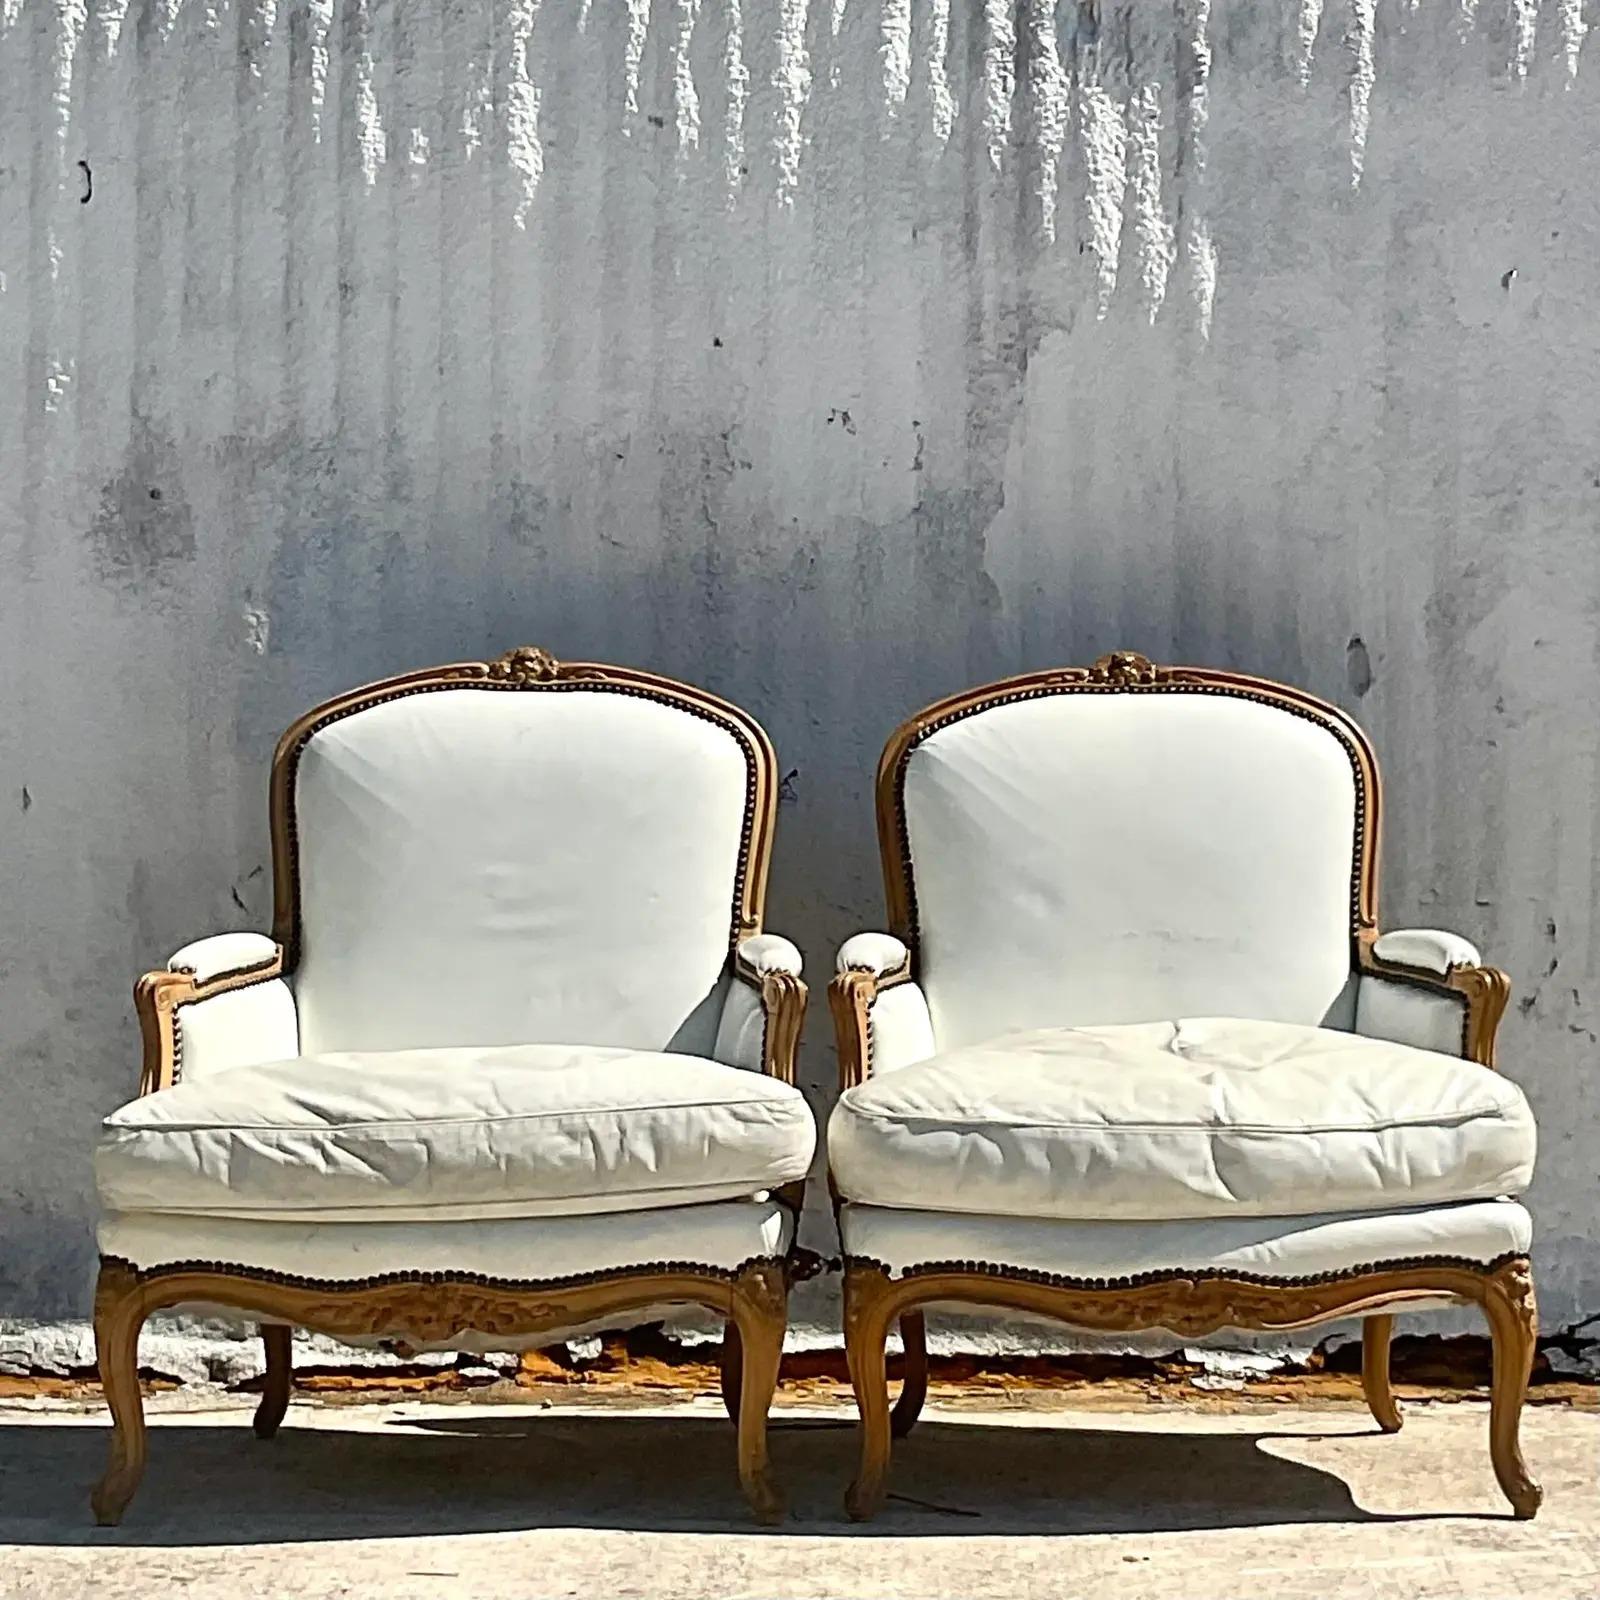 Vintage Boho John Dickinson White Leather Bergere Chairs - a Pair For Sale 4